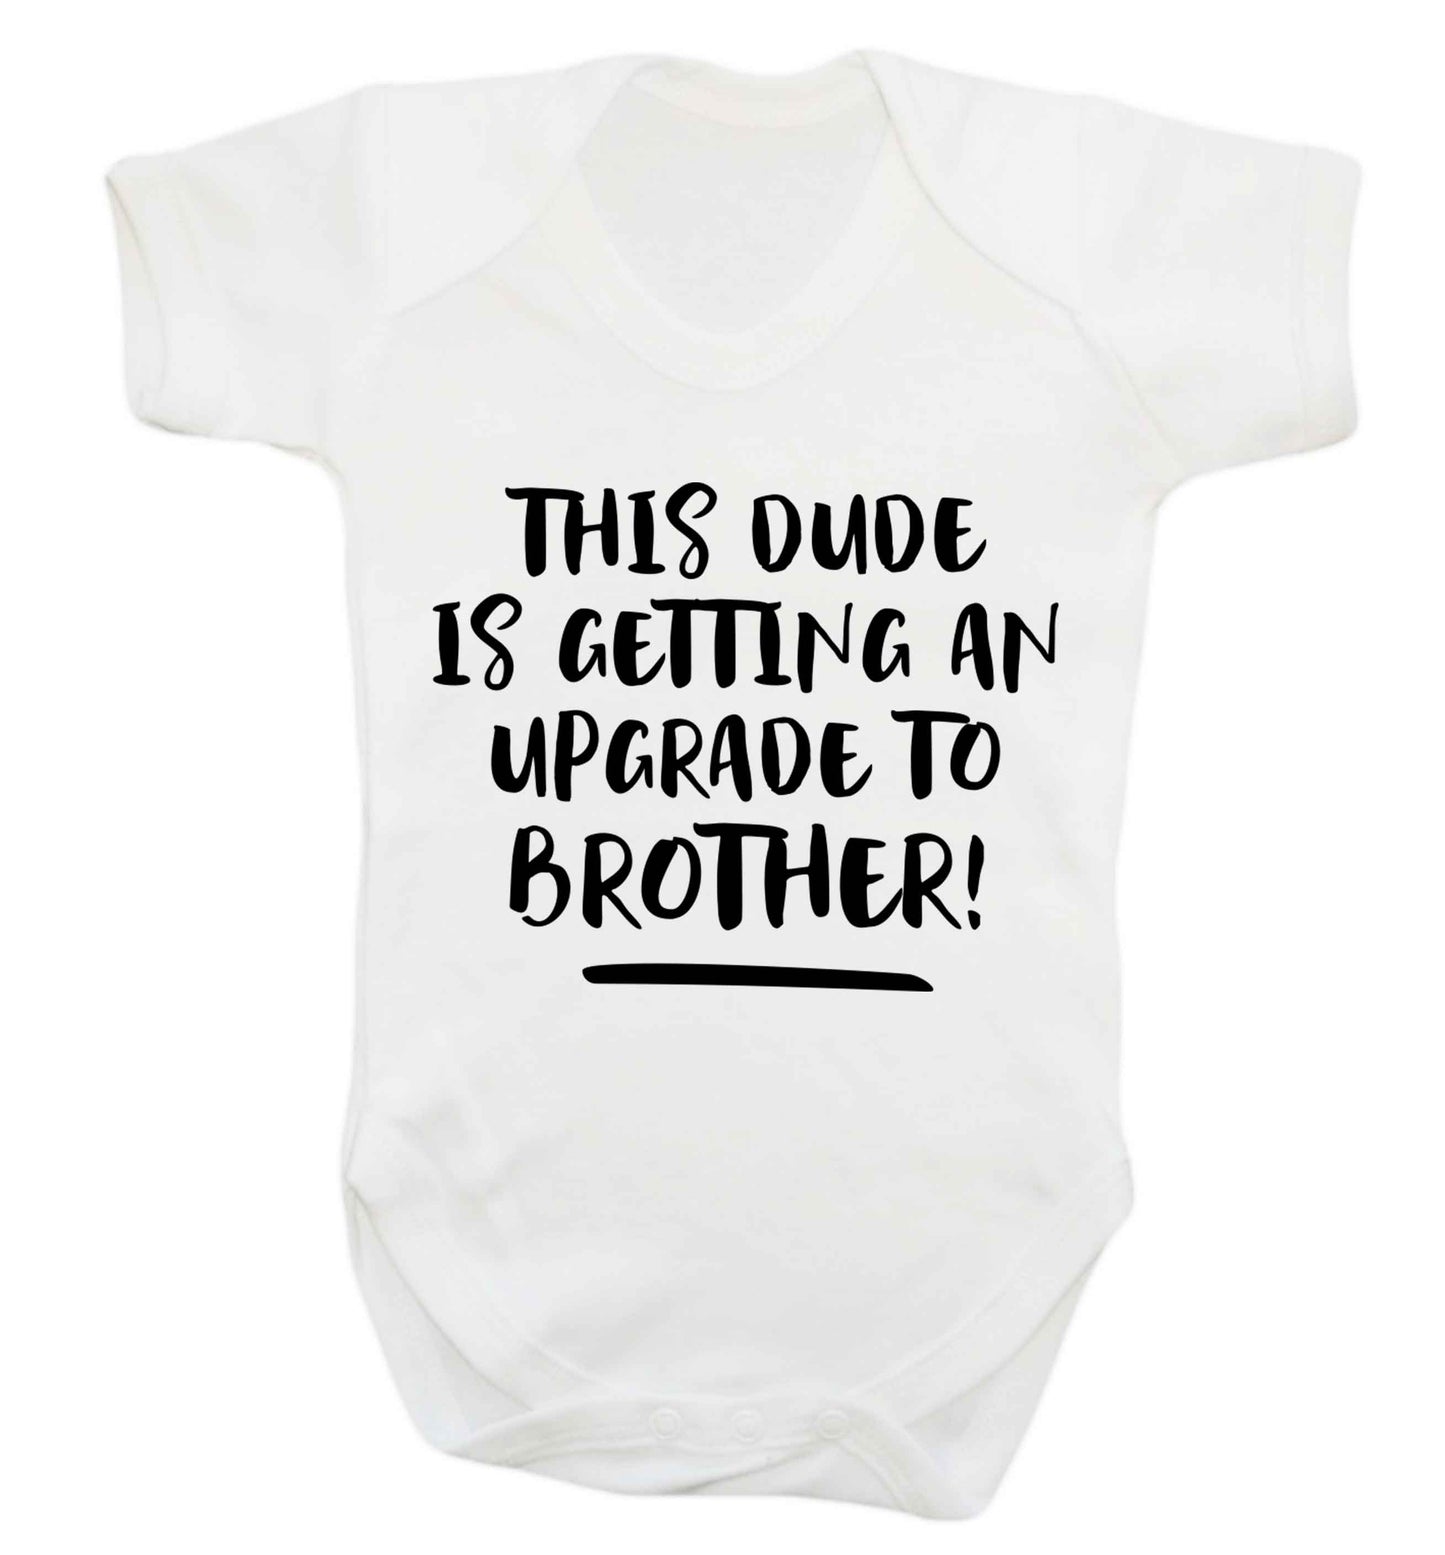 This dude is getting an upgrade to brother! Baby Vest white 18-24 months